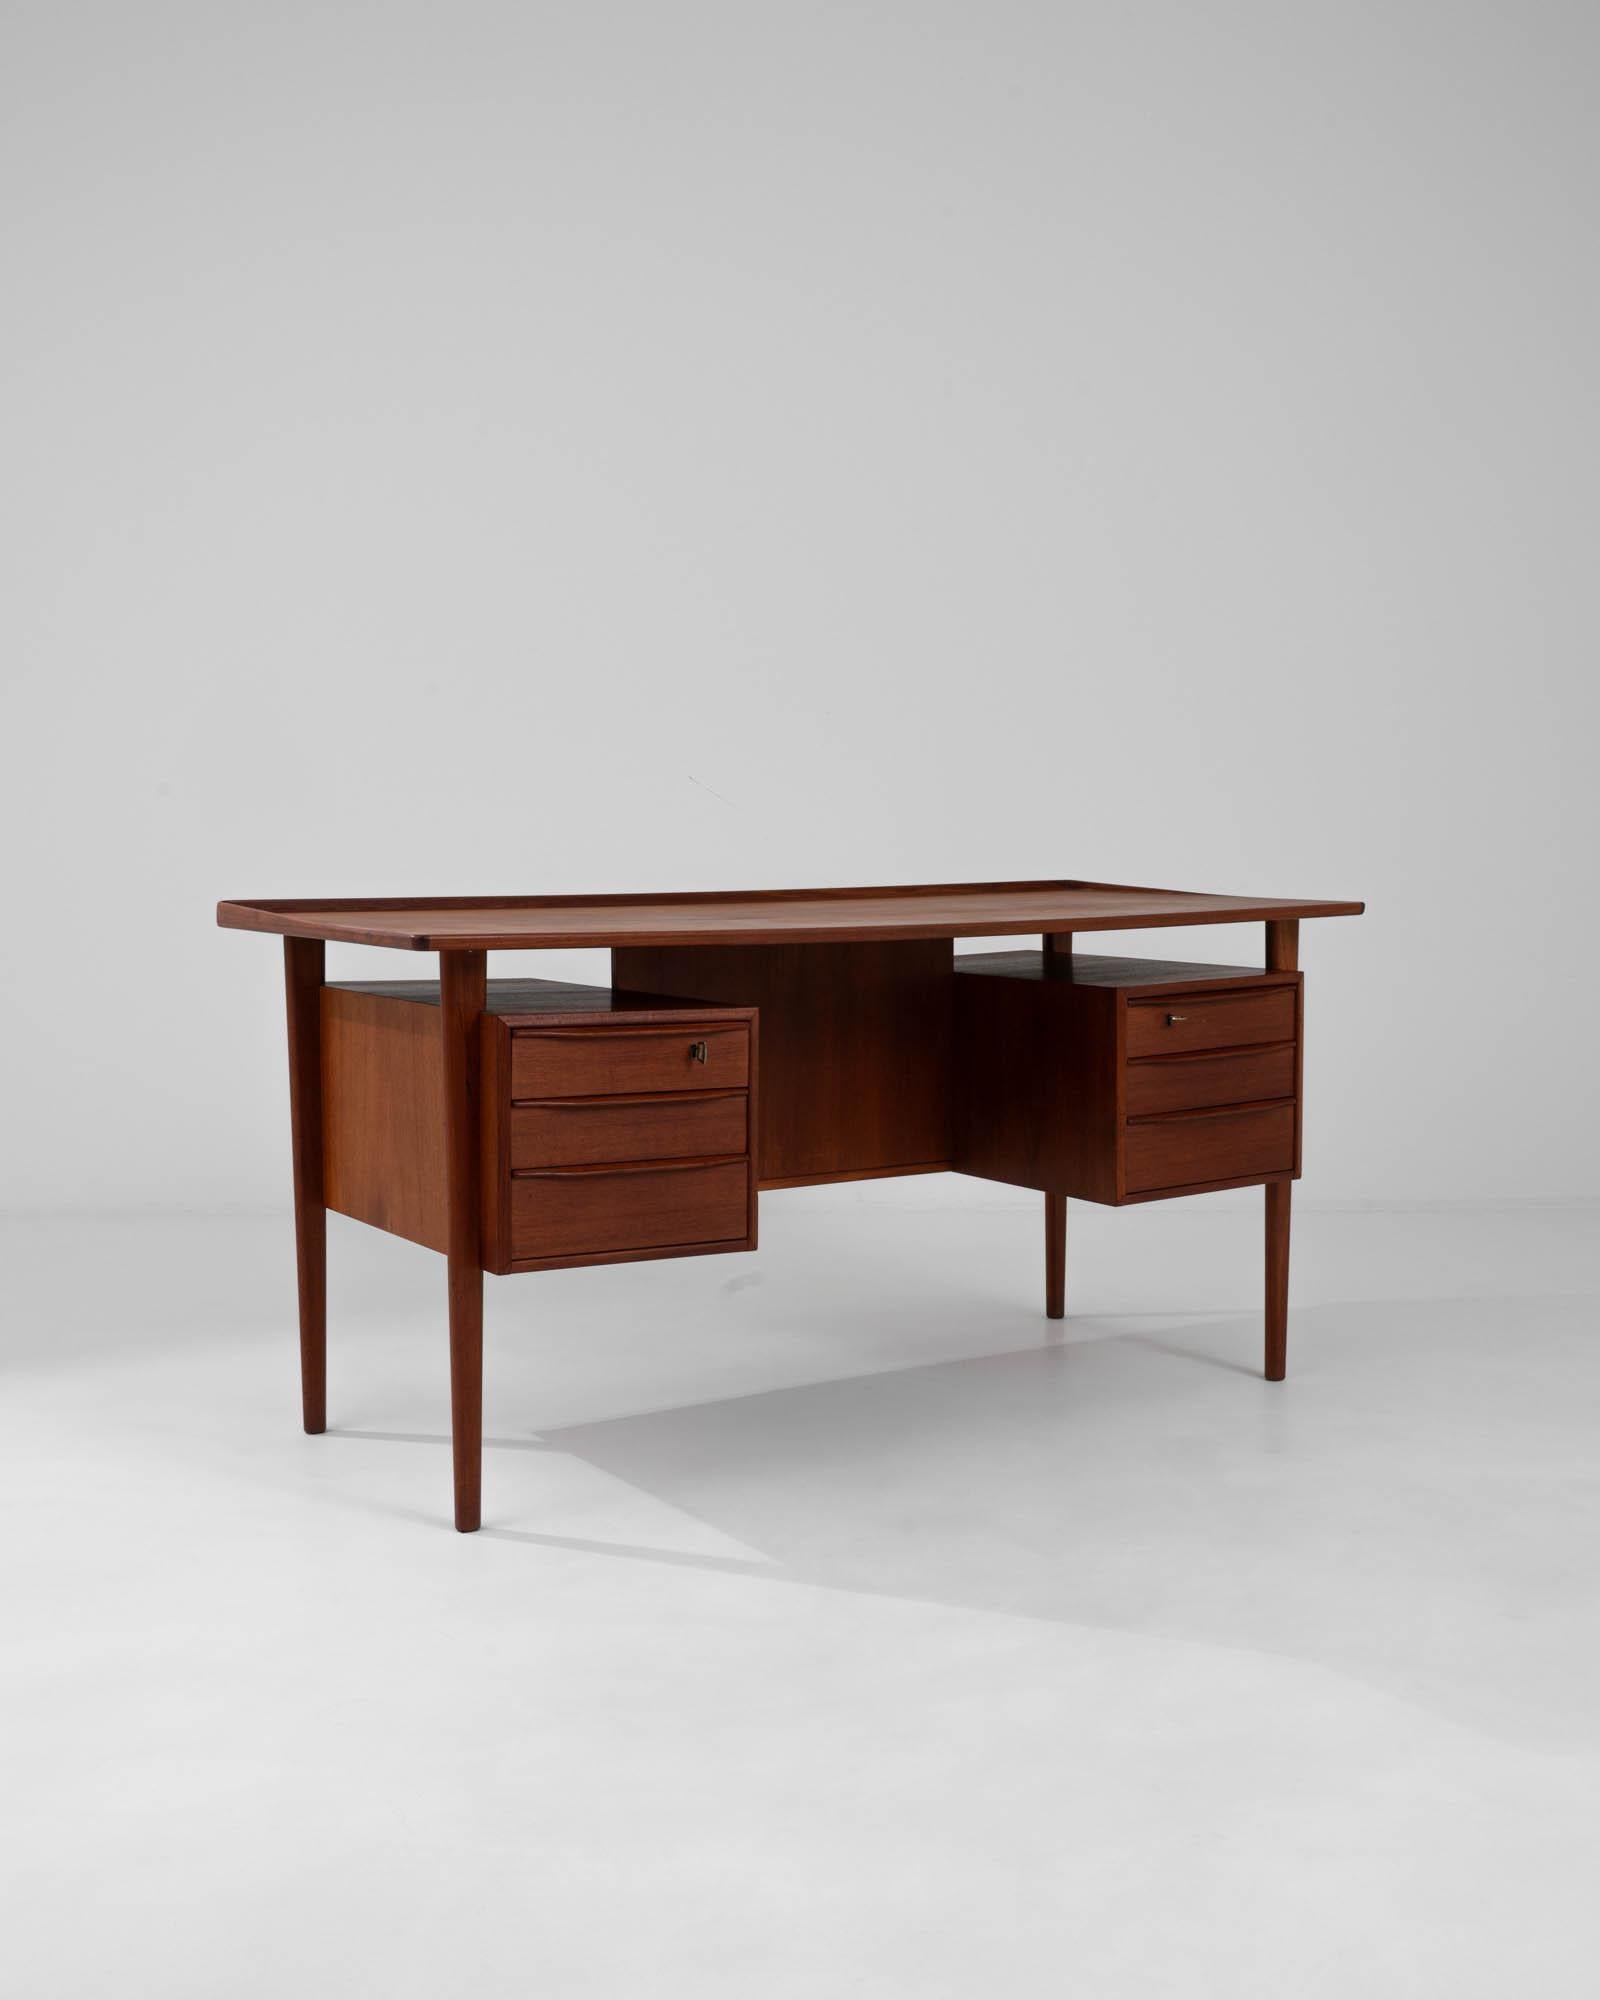 Infuse your workspace with the timeless elegance of Scandinavian design with this 20th Century Danish Teak Desk by Peter Løvig Nielsen. Crafted from rich teak wood, known for its durability and warm hue, this desk epitomizes mid-century modern style